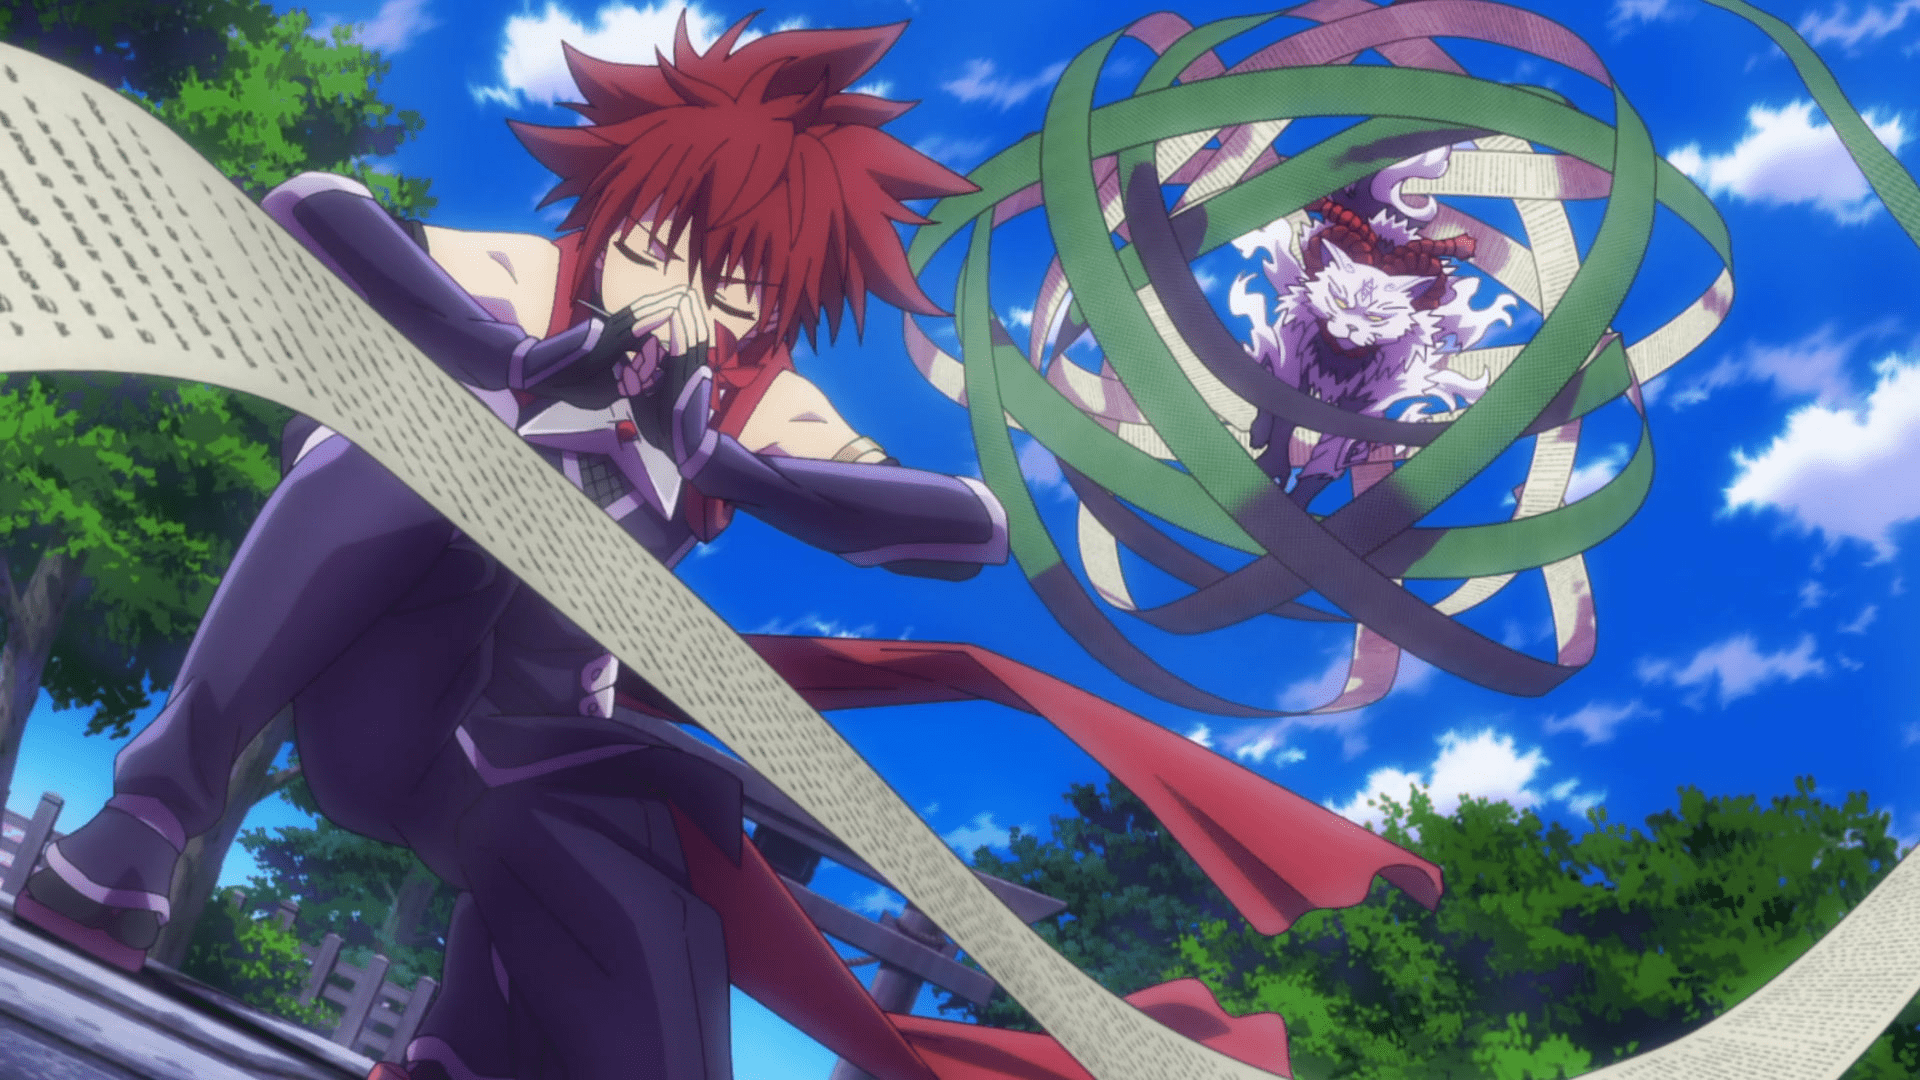 Anime monsters are lurking in Ayakashi Triangle and other shows this season!